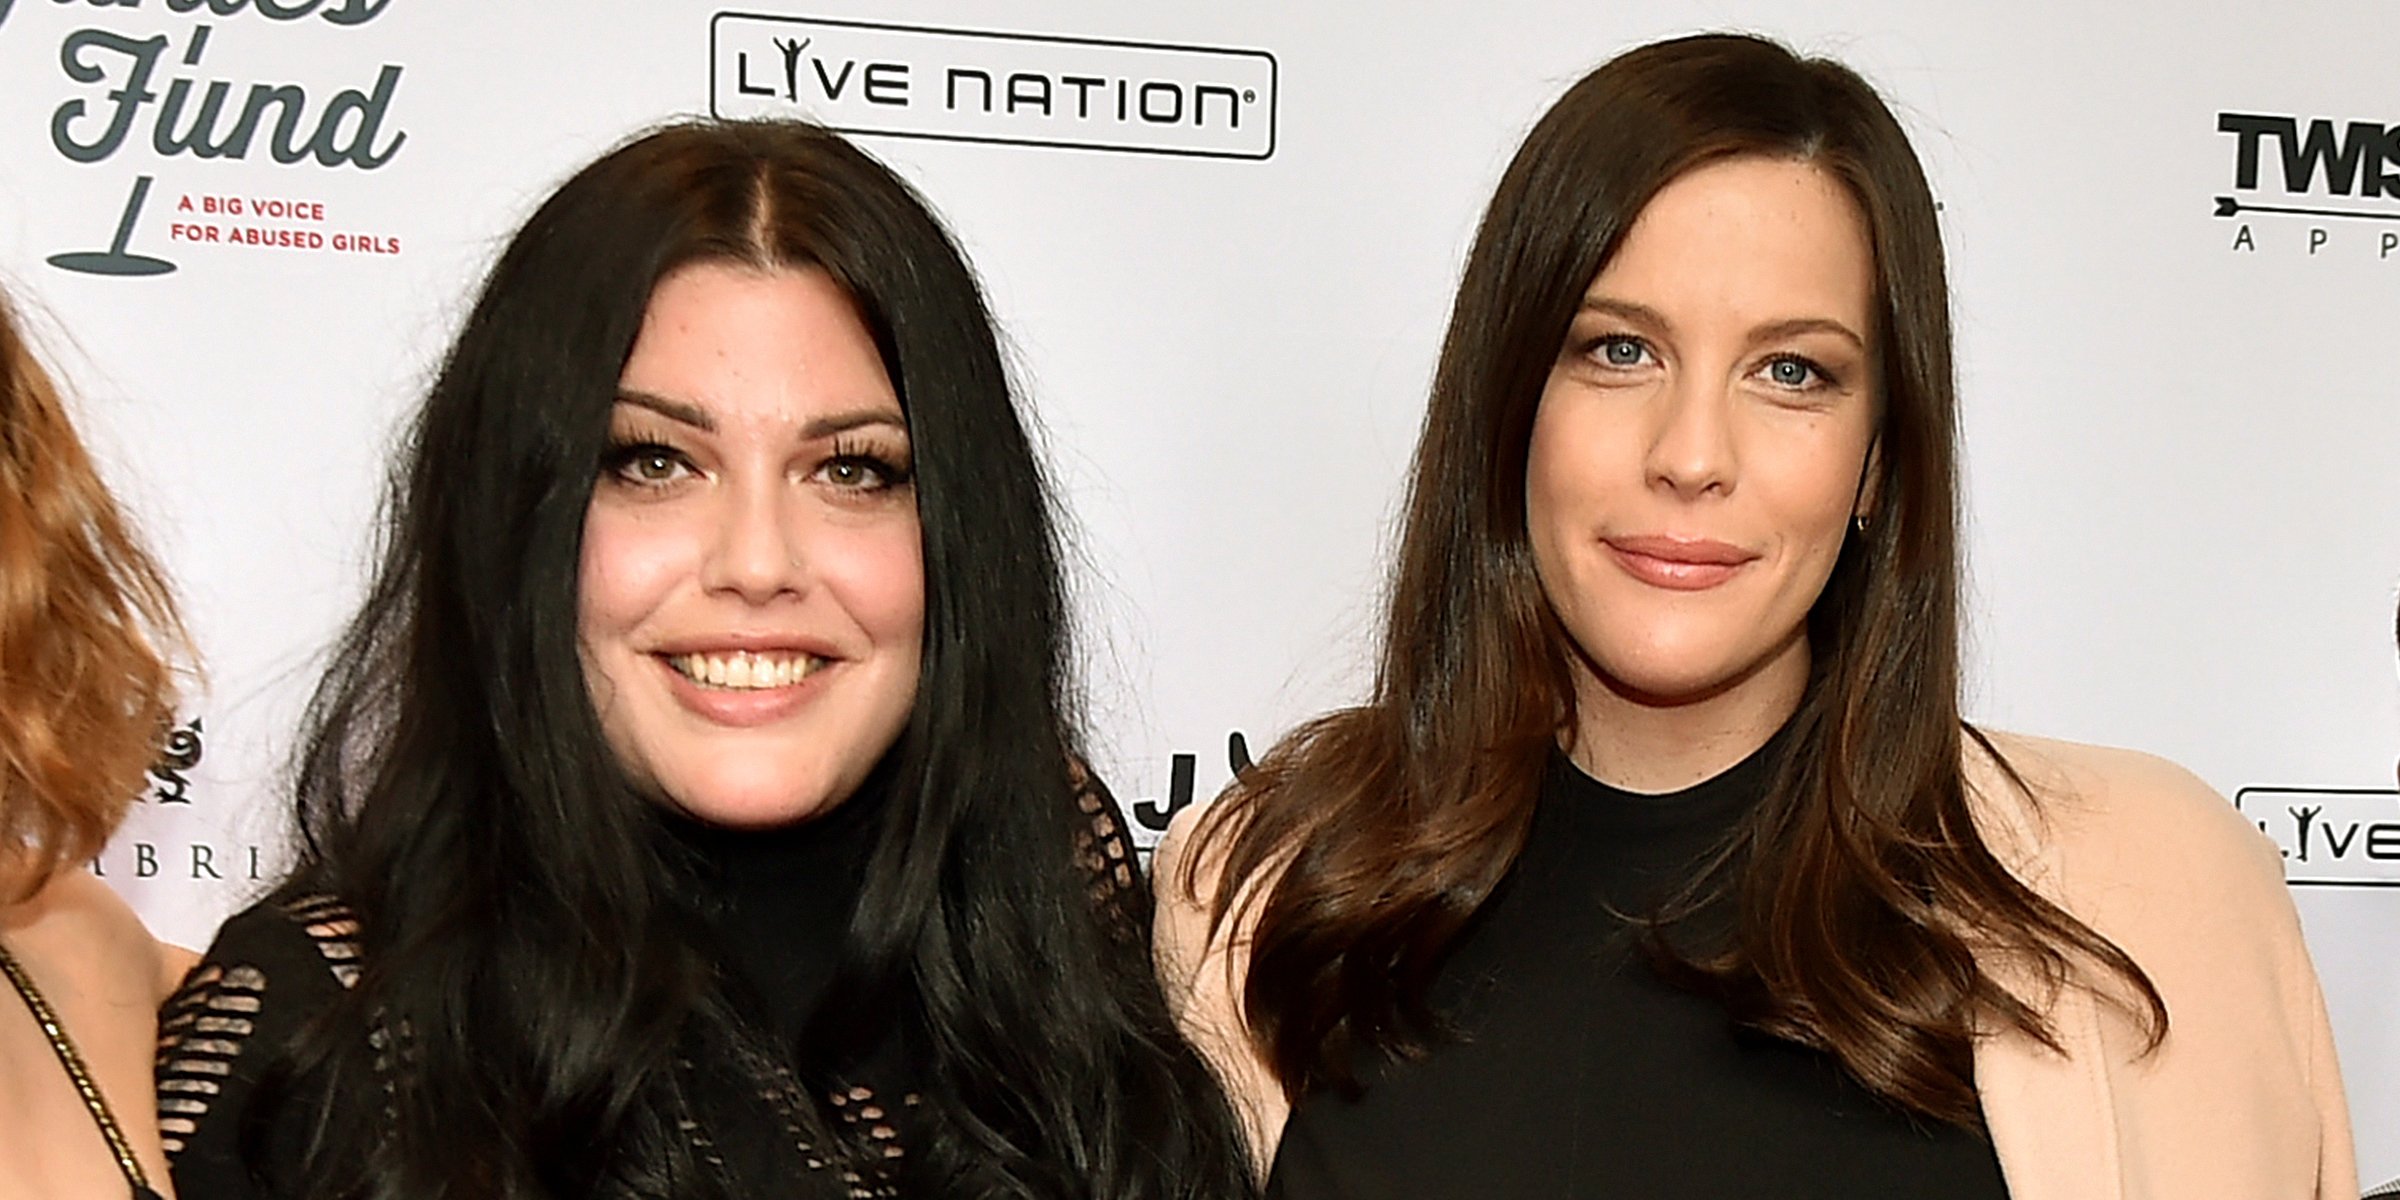 Liv Tyler and Mia Tyler | Source: Getty Images